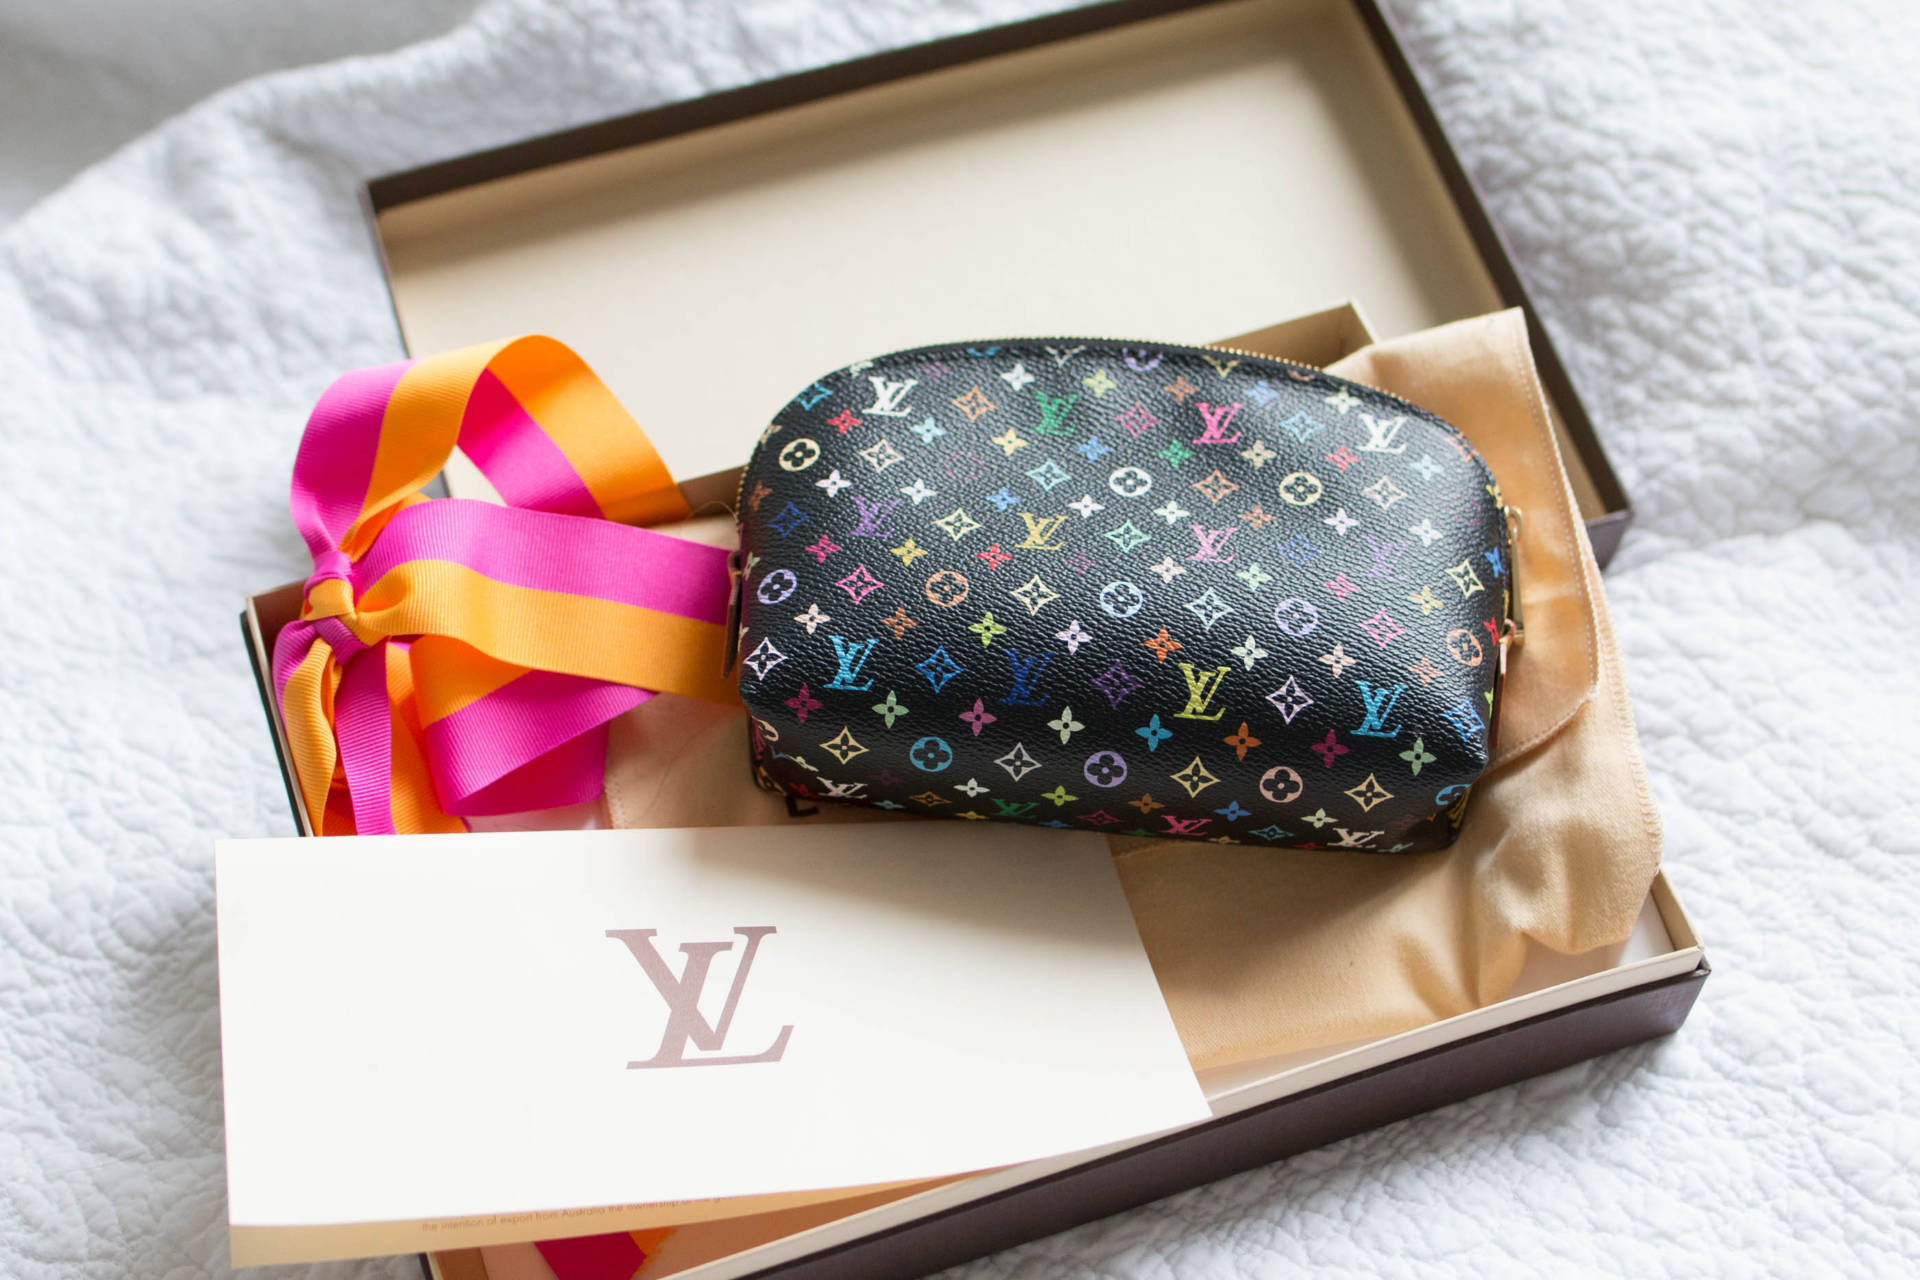 Louis Vuitton Cosmetic Pouch Pm In Black